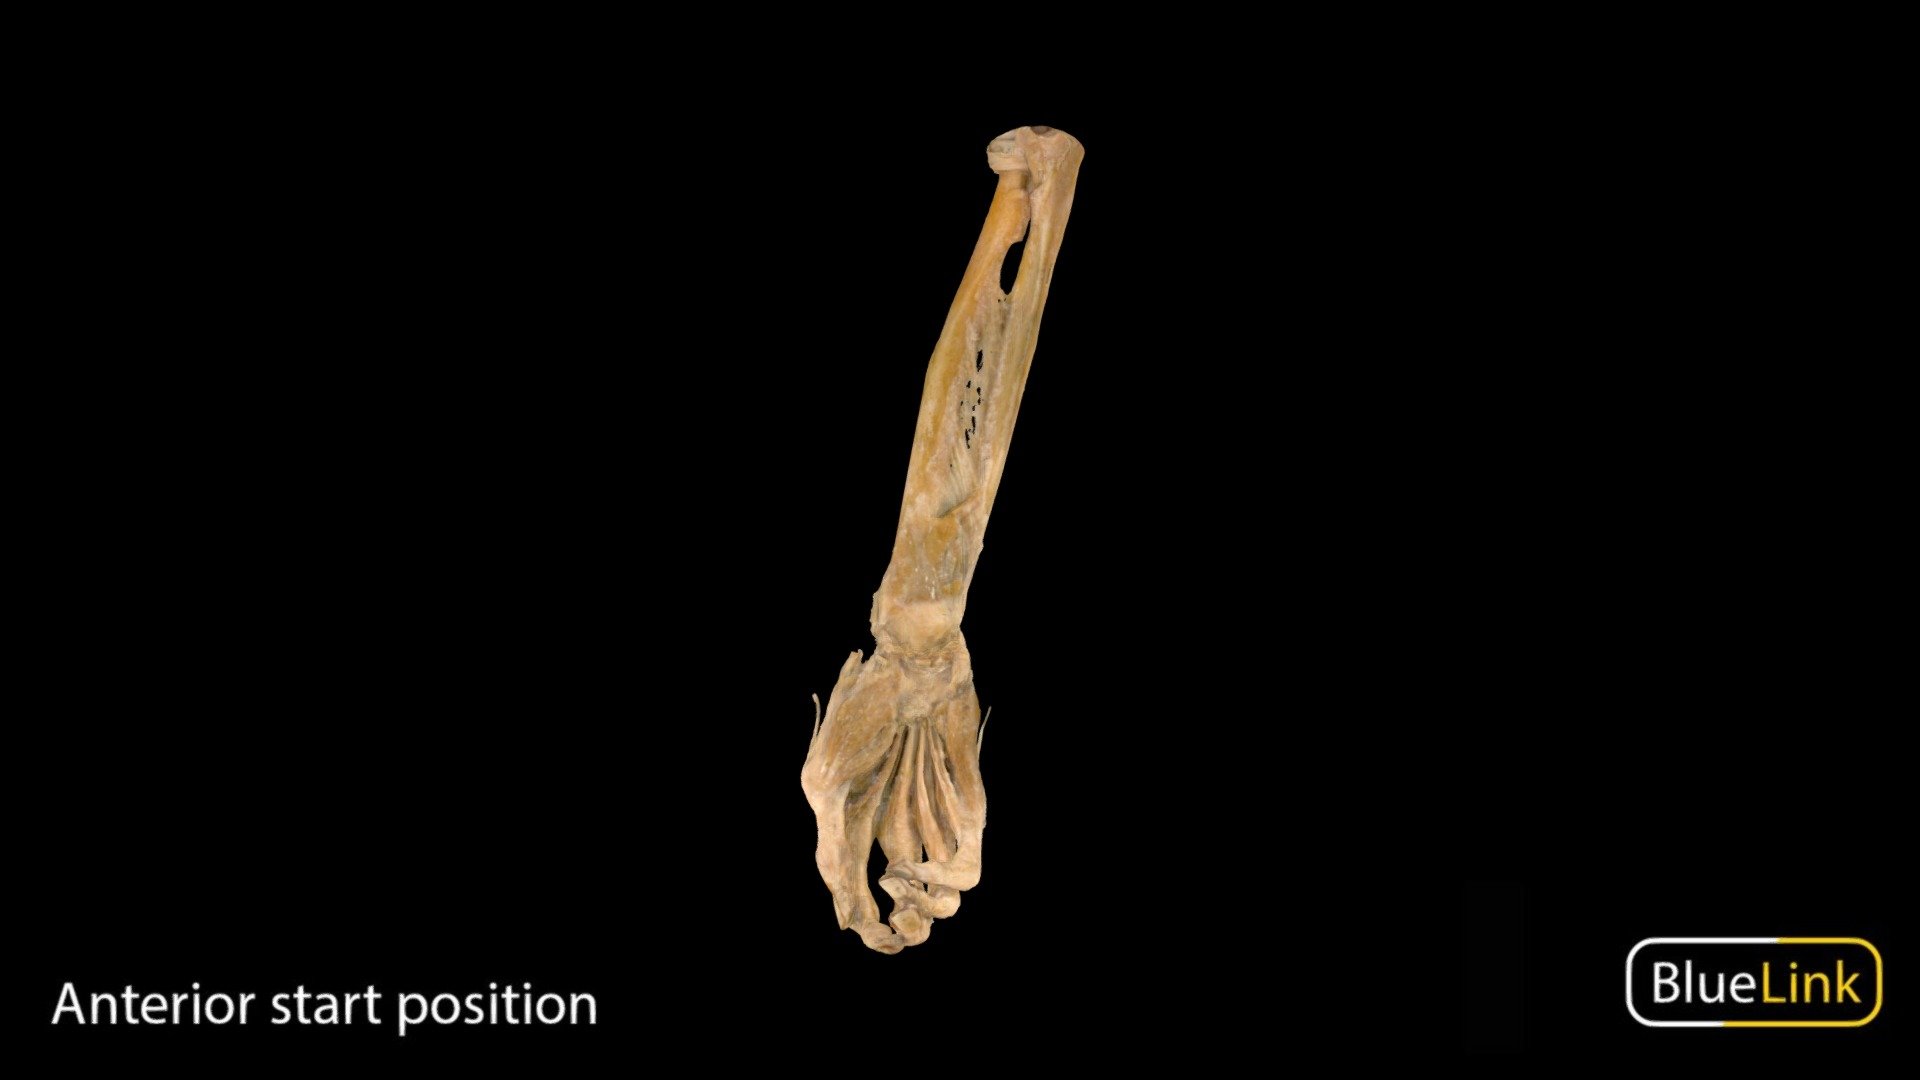 3D scan of the the right forearm

Captured with Einscan Pro

Captured and edited by: Will Gribbin

Copyright2019 BK Alsup &amp; GM Fox

ID 25671-U06 - Right Arm Pronator Quadratus - 3D model by Bluelink Anatomy - University of Michigan (@bluelinkanatomy) 3d model